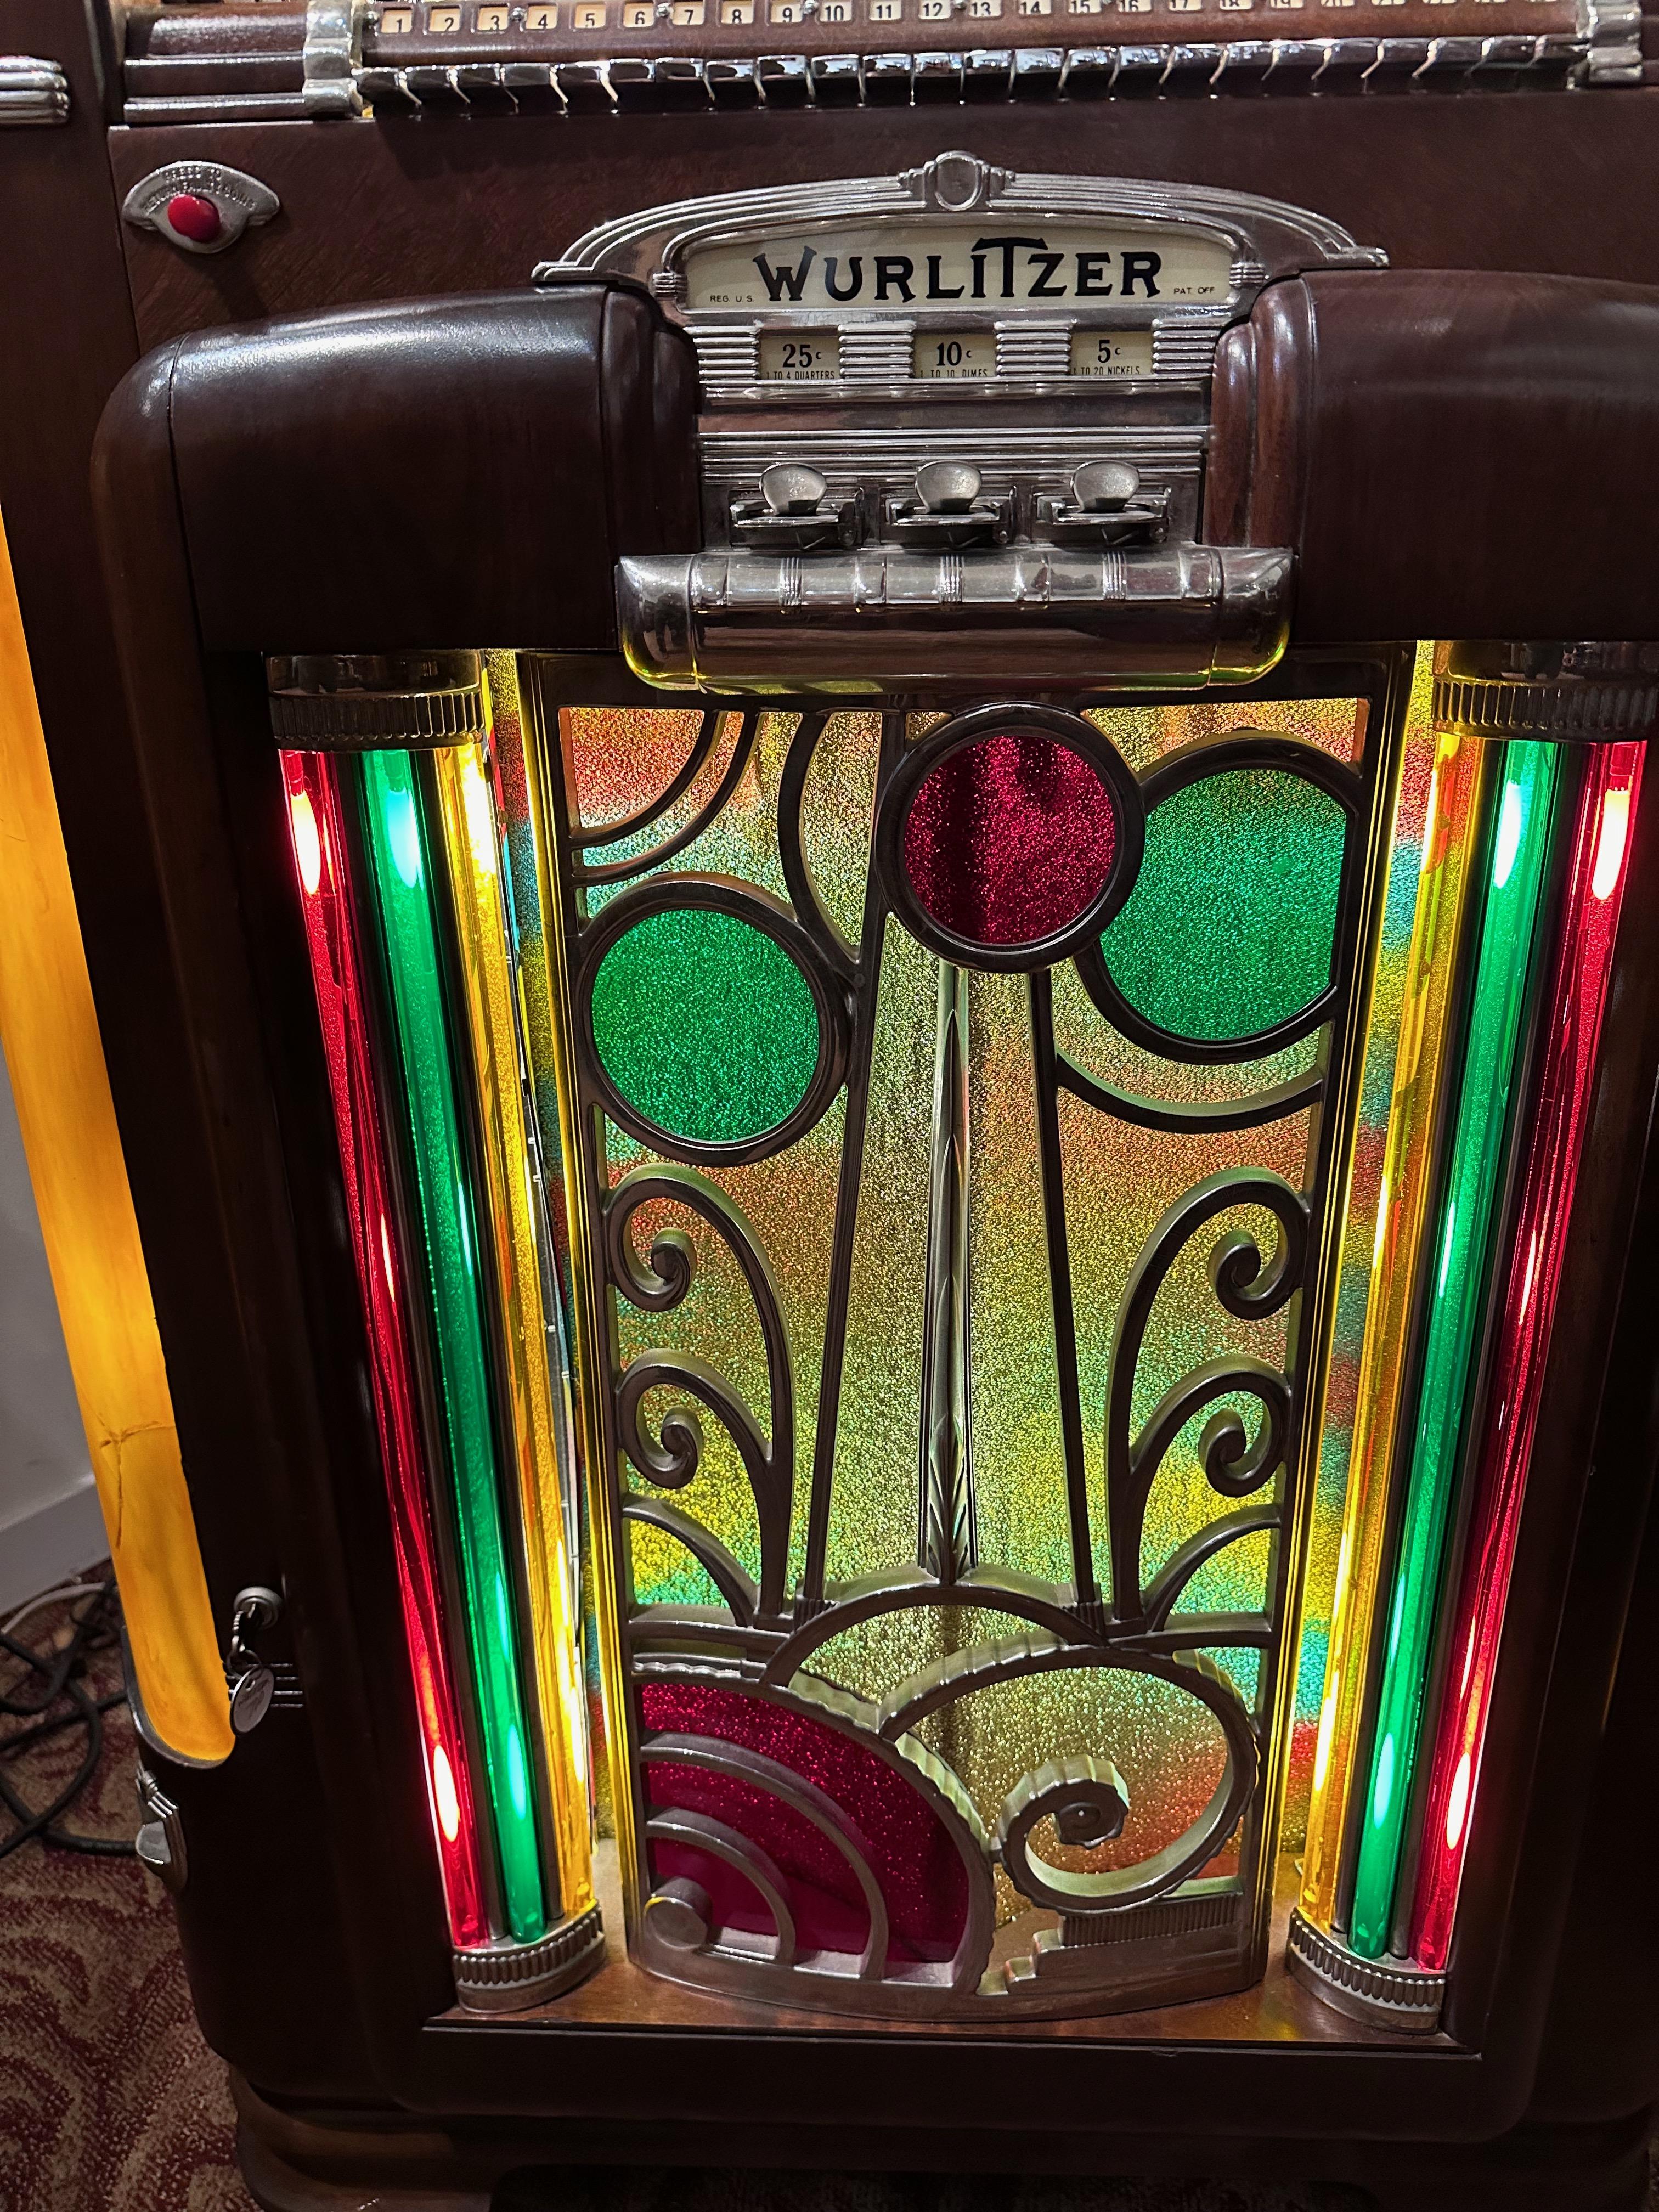 Wurlitzer 700 was a design masterpiece by Paul Fuller, its smooth art deco lines have stood the test of time, and it is a beautiful creation. This model plays 78-style records and the mechanism and sound are great. It holds 24 records in re-chromed